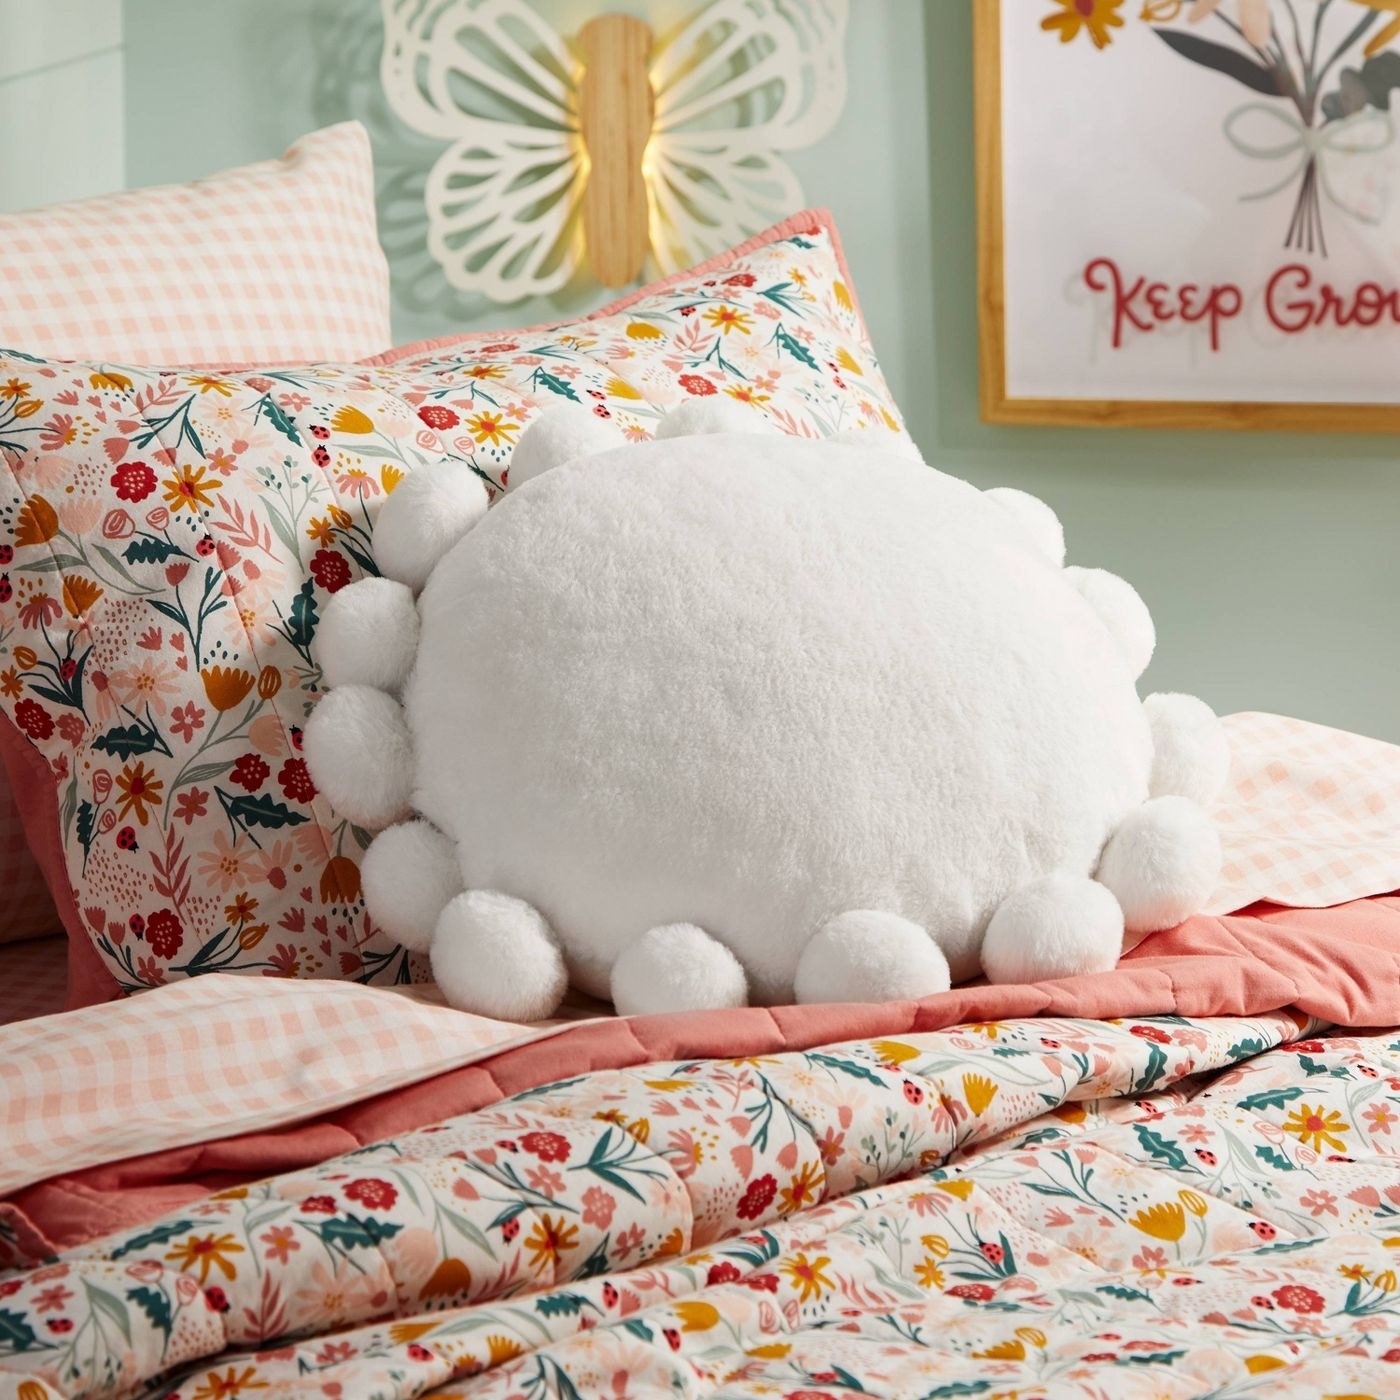 A white pom pom pillow on a pink floral bed